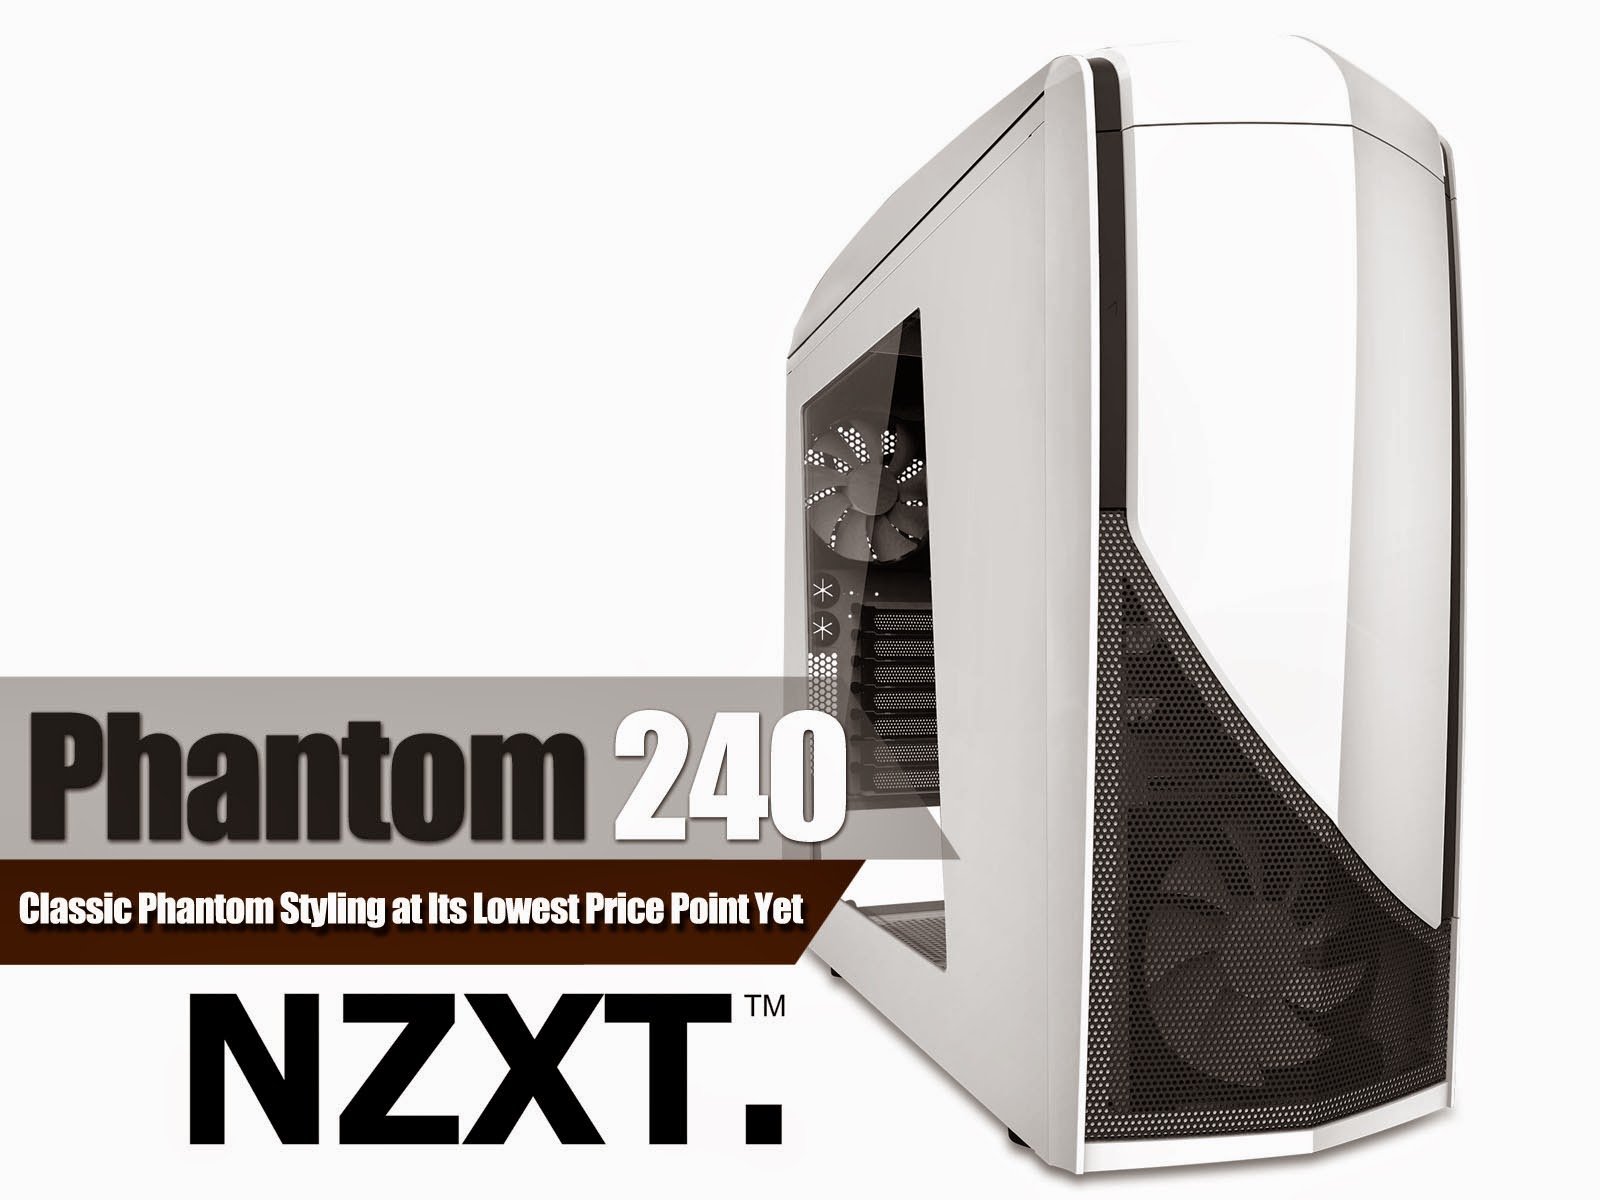 NZXT Announces Release of the Phantom 240 Mid-Tower Chassis 2